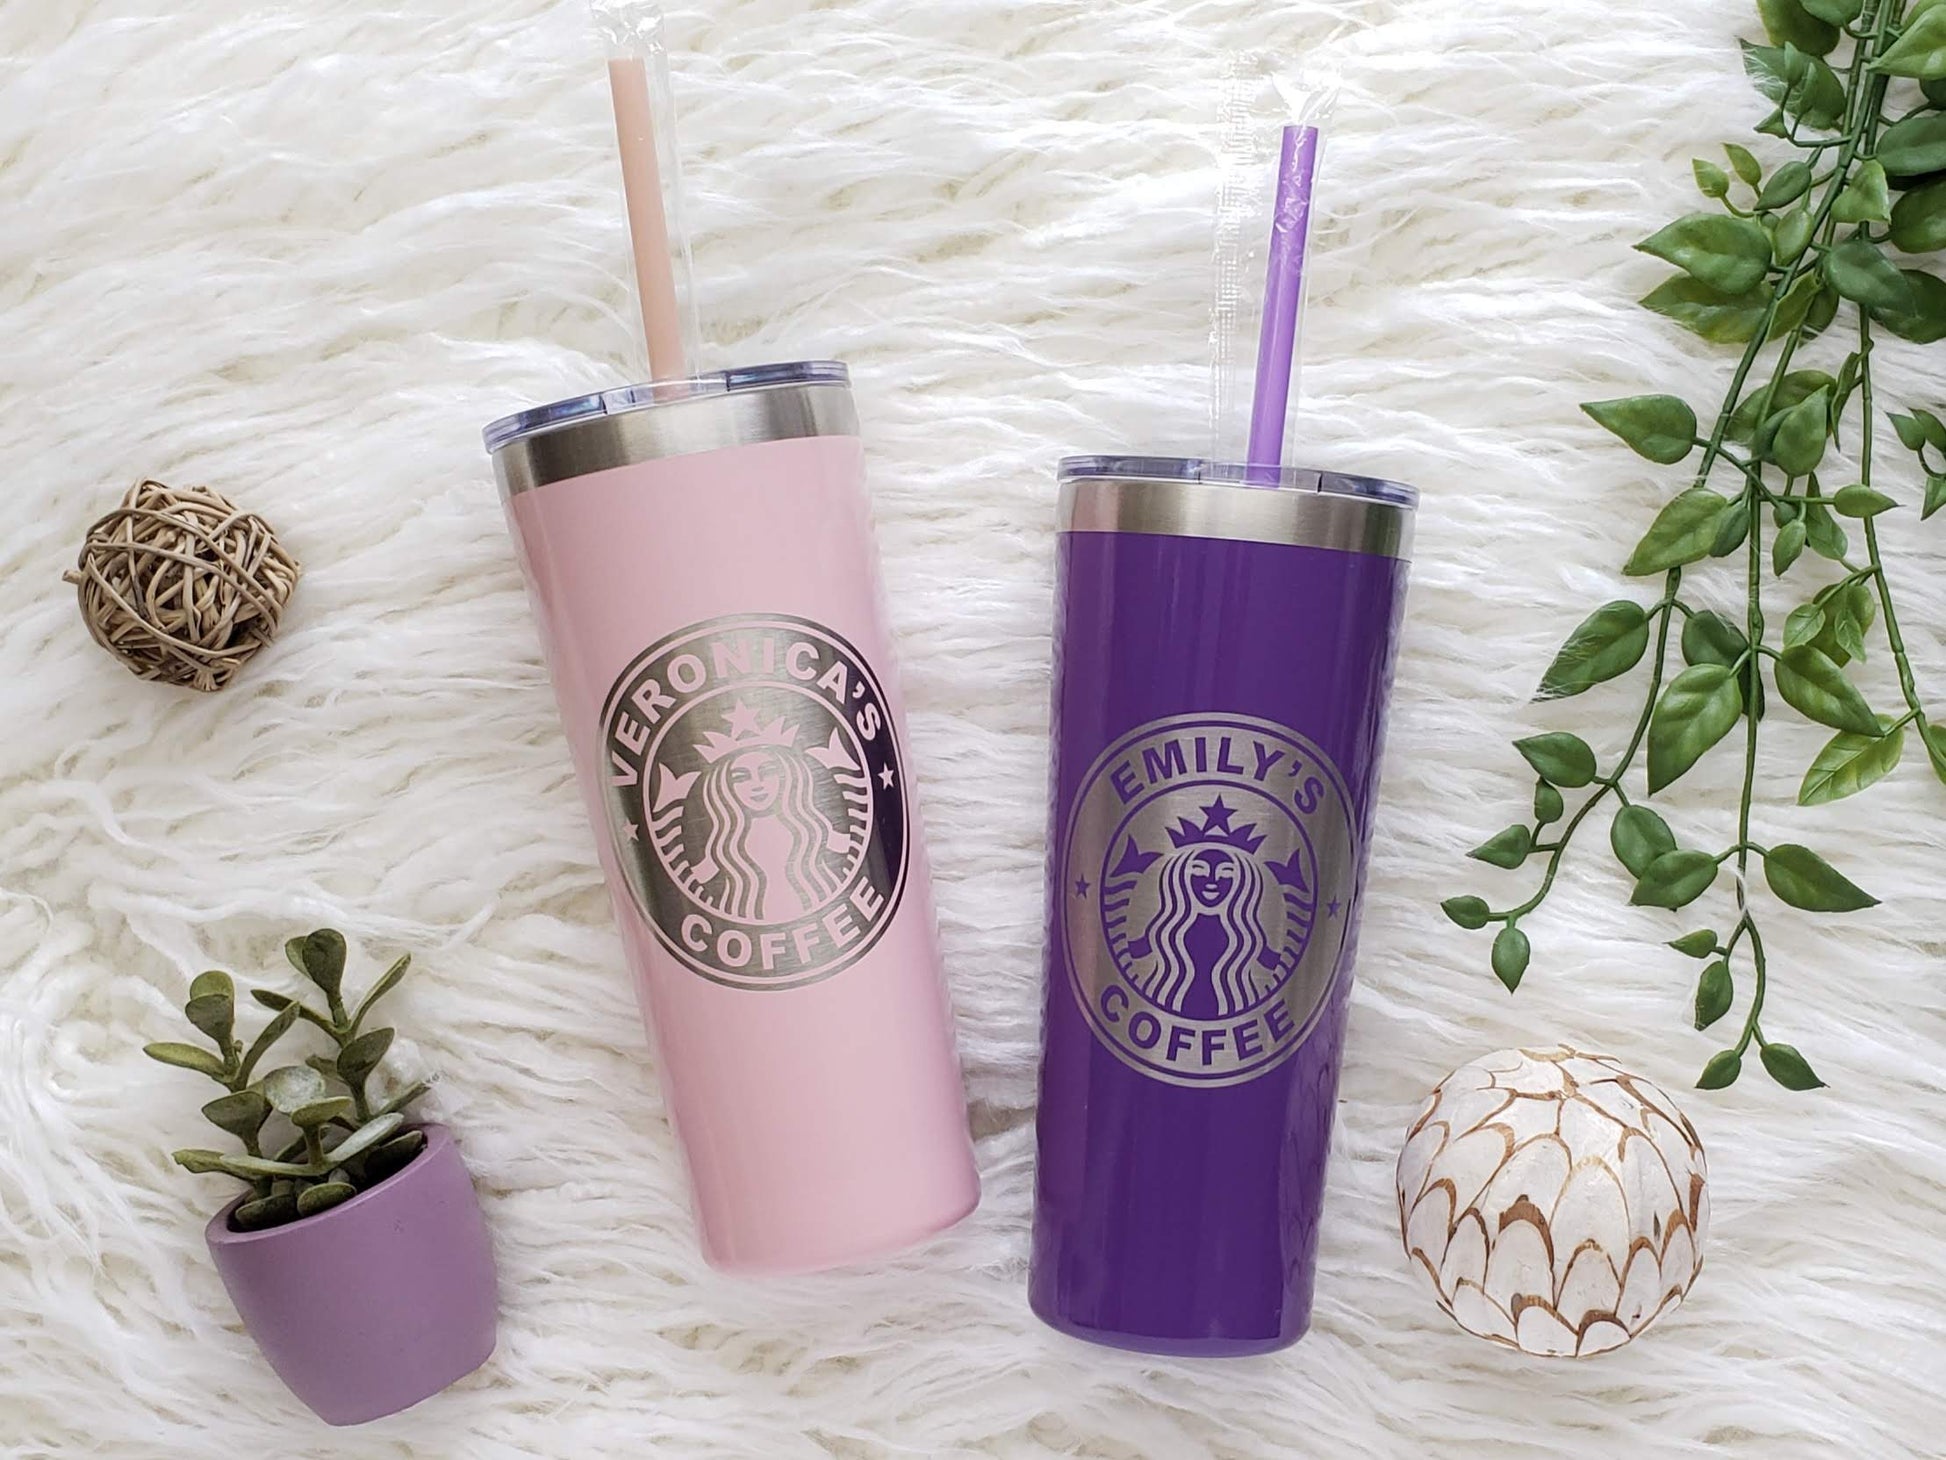 Starbucks Stainless Steel Tumbler 24 oz with Etched Logo